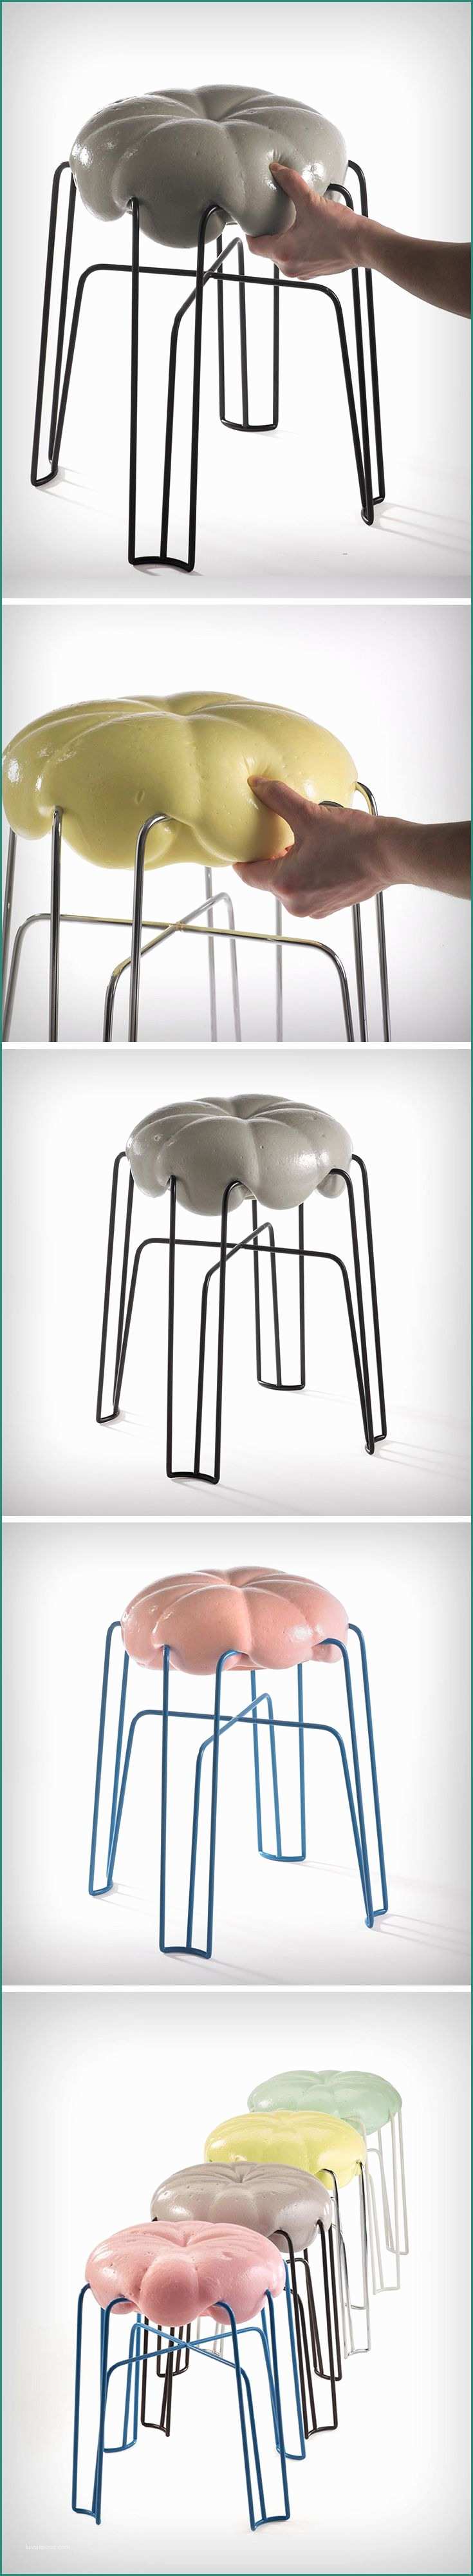 Sedie Philippe Starck E 763 Best Chairs Se Sillas Images On Pinterest